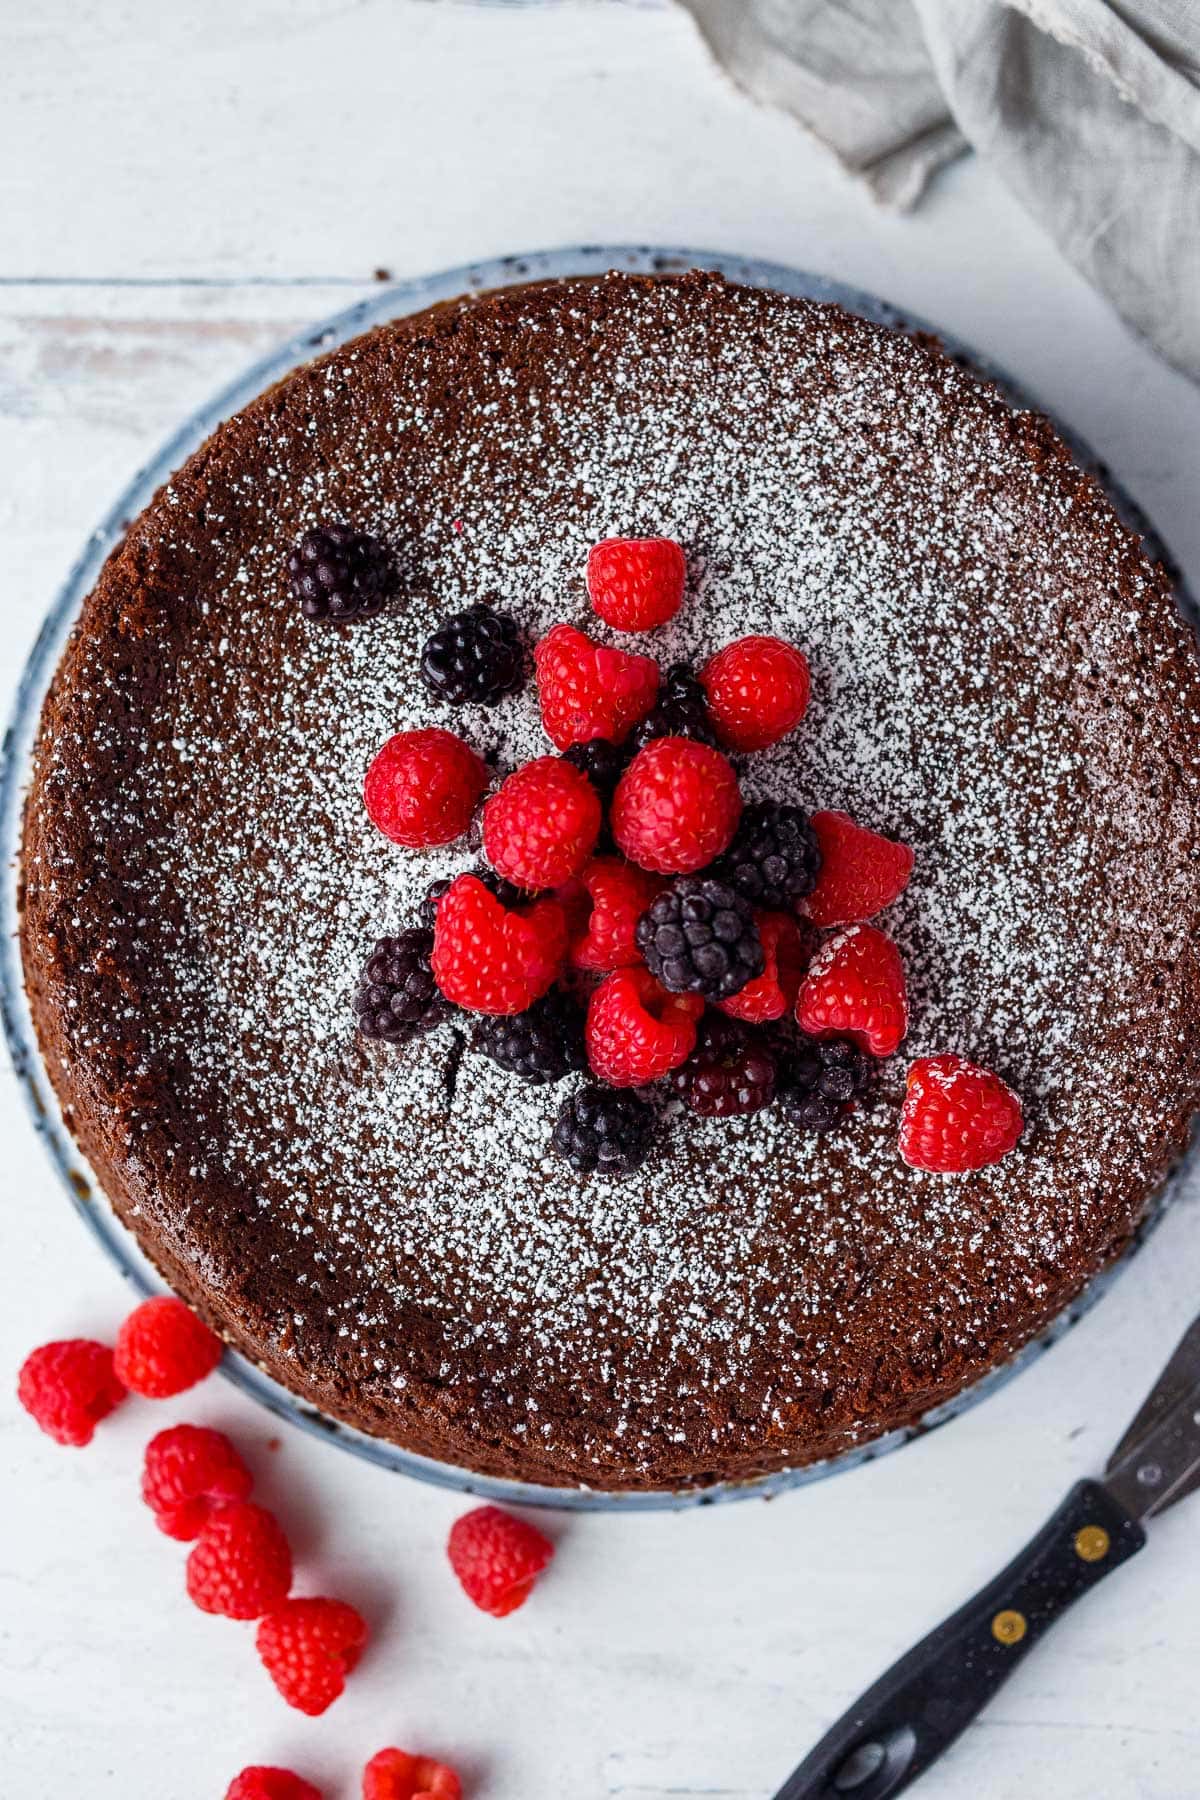 A whole Flourless  Chocolate Torte with fresh berries and powdered sugar.